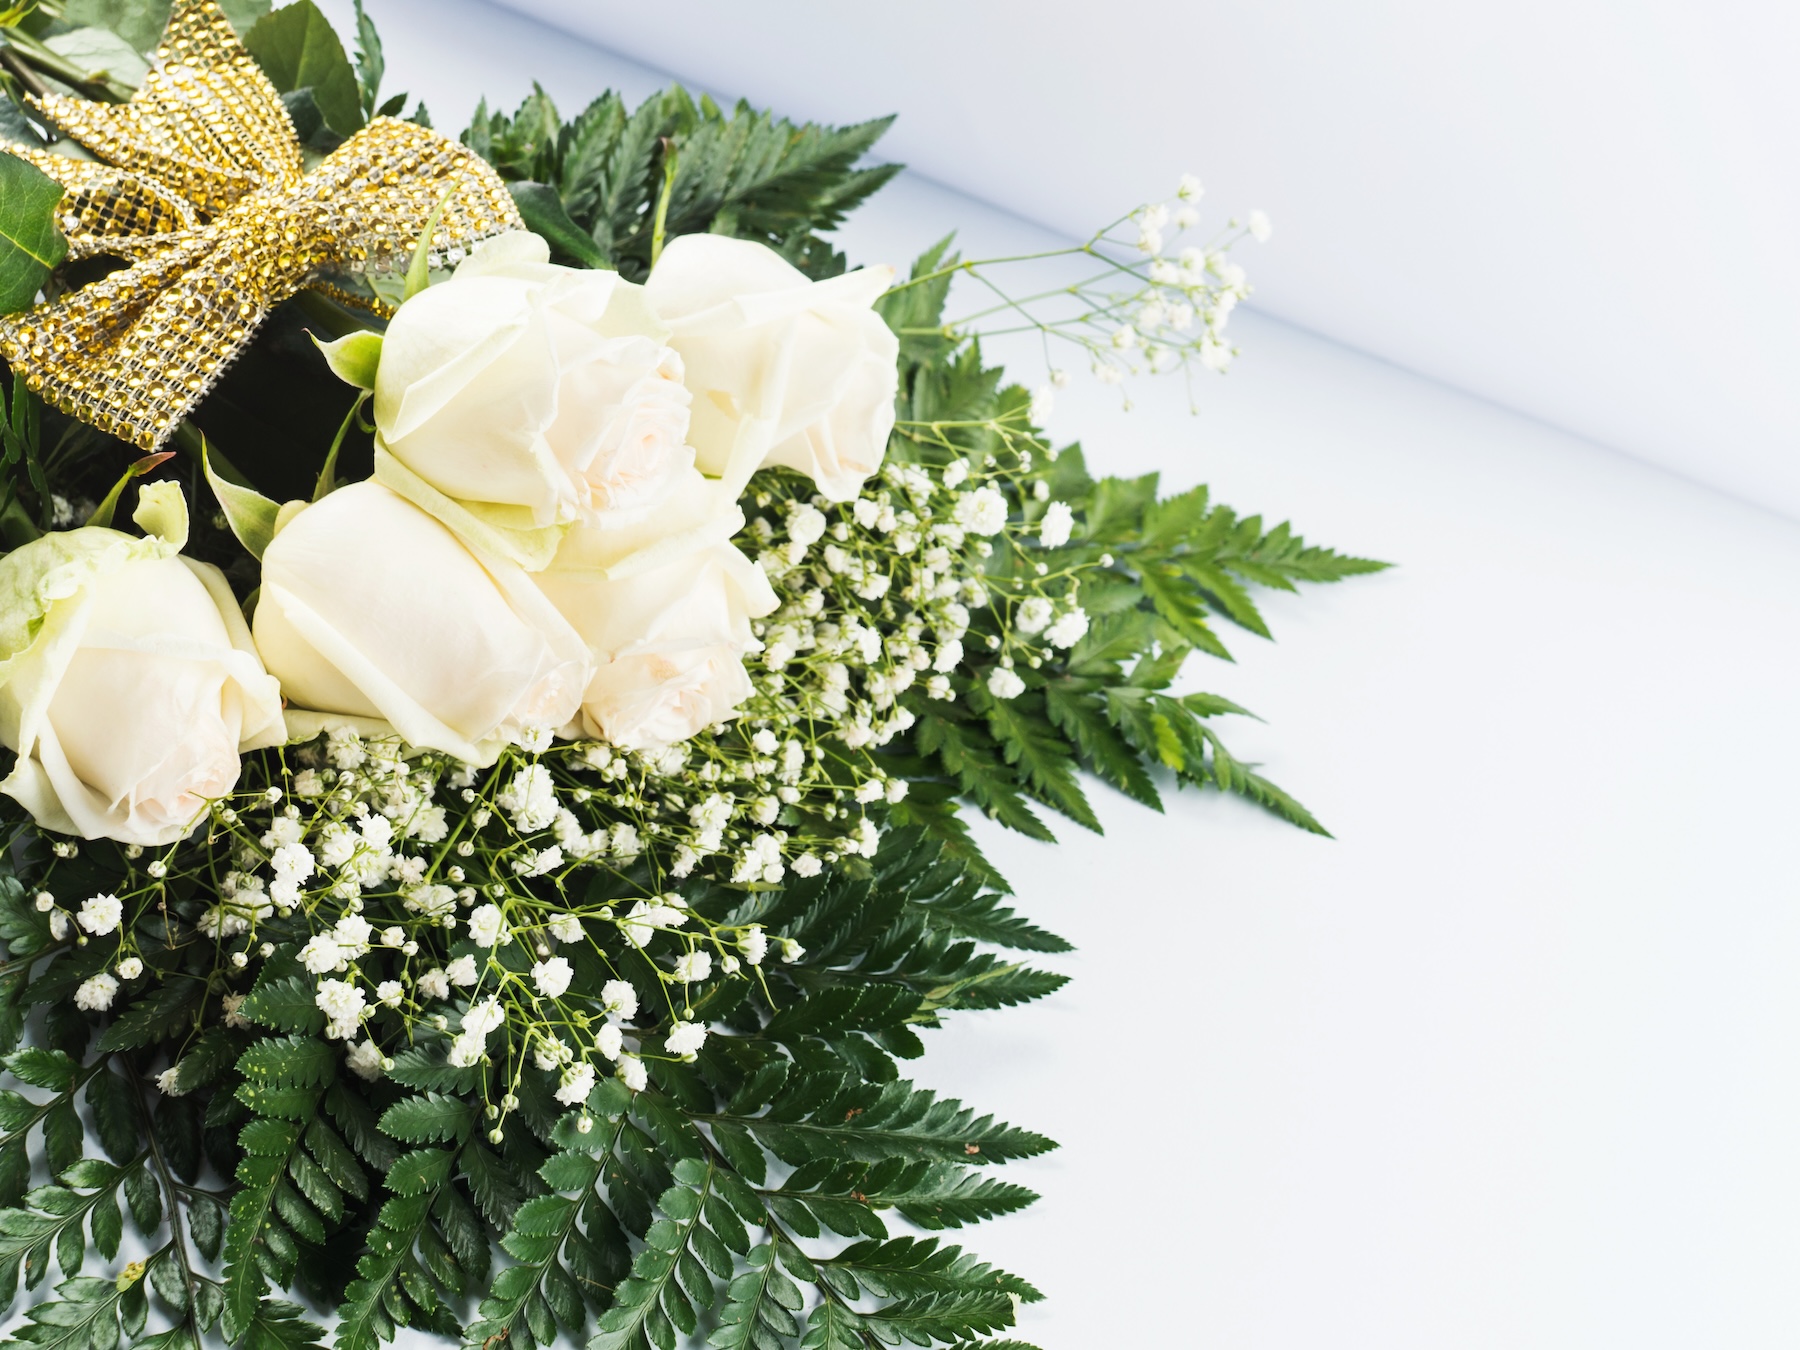 An elegant Mother's Day arrangement of pale roses and baby's breath with ferns, adorned with a golden bow.